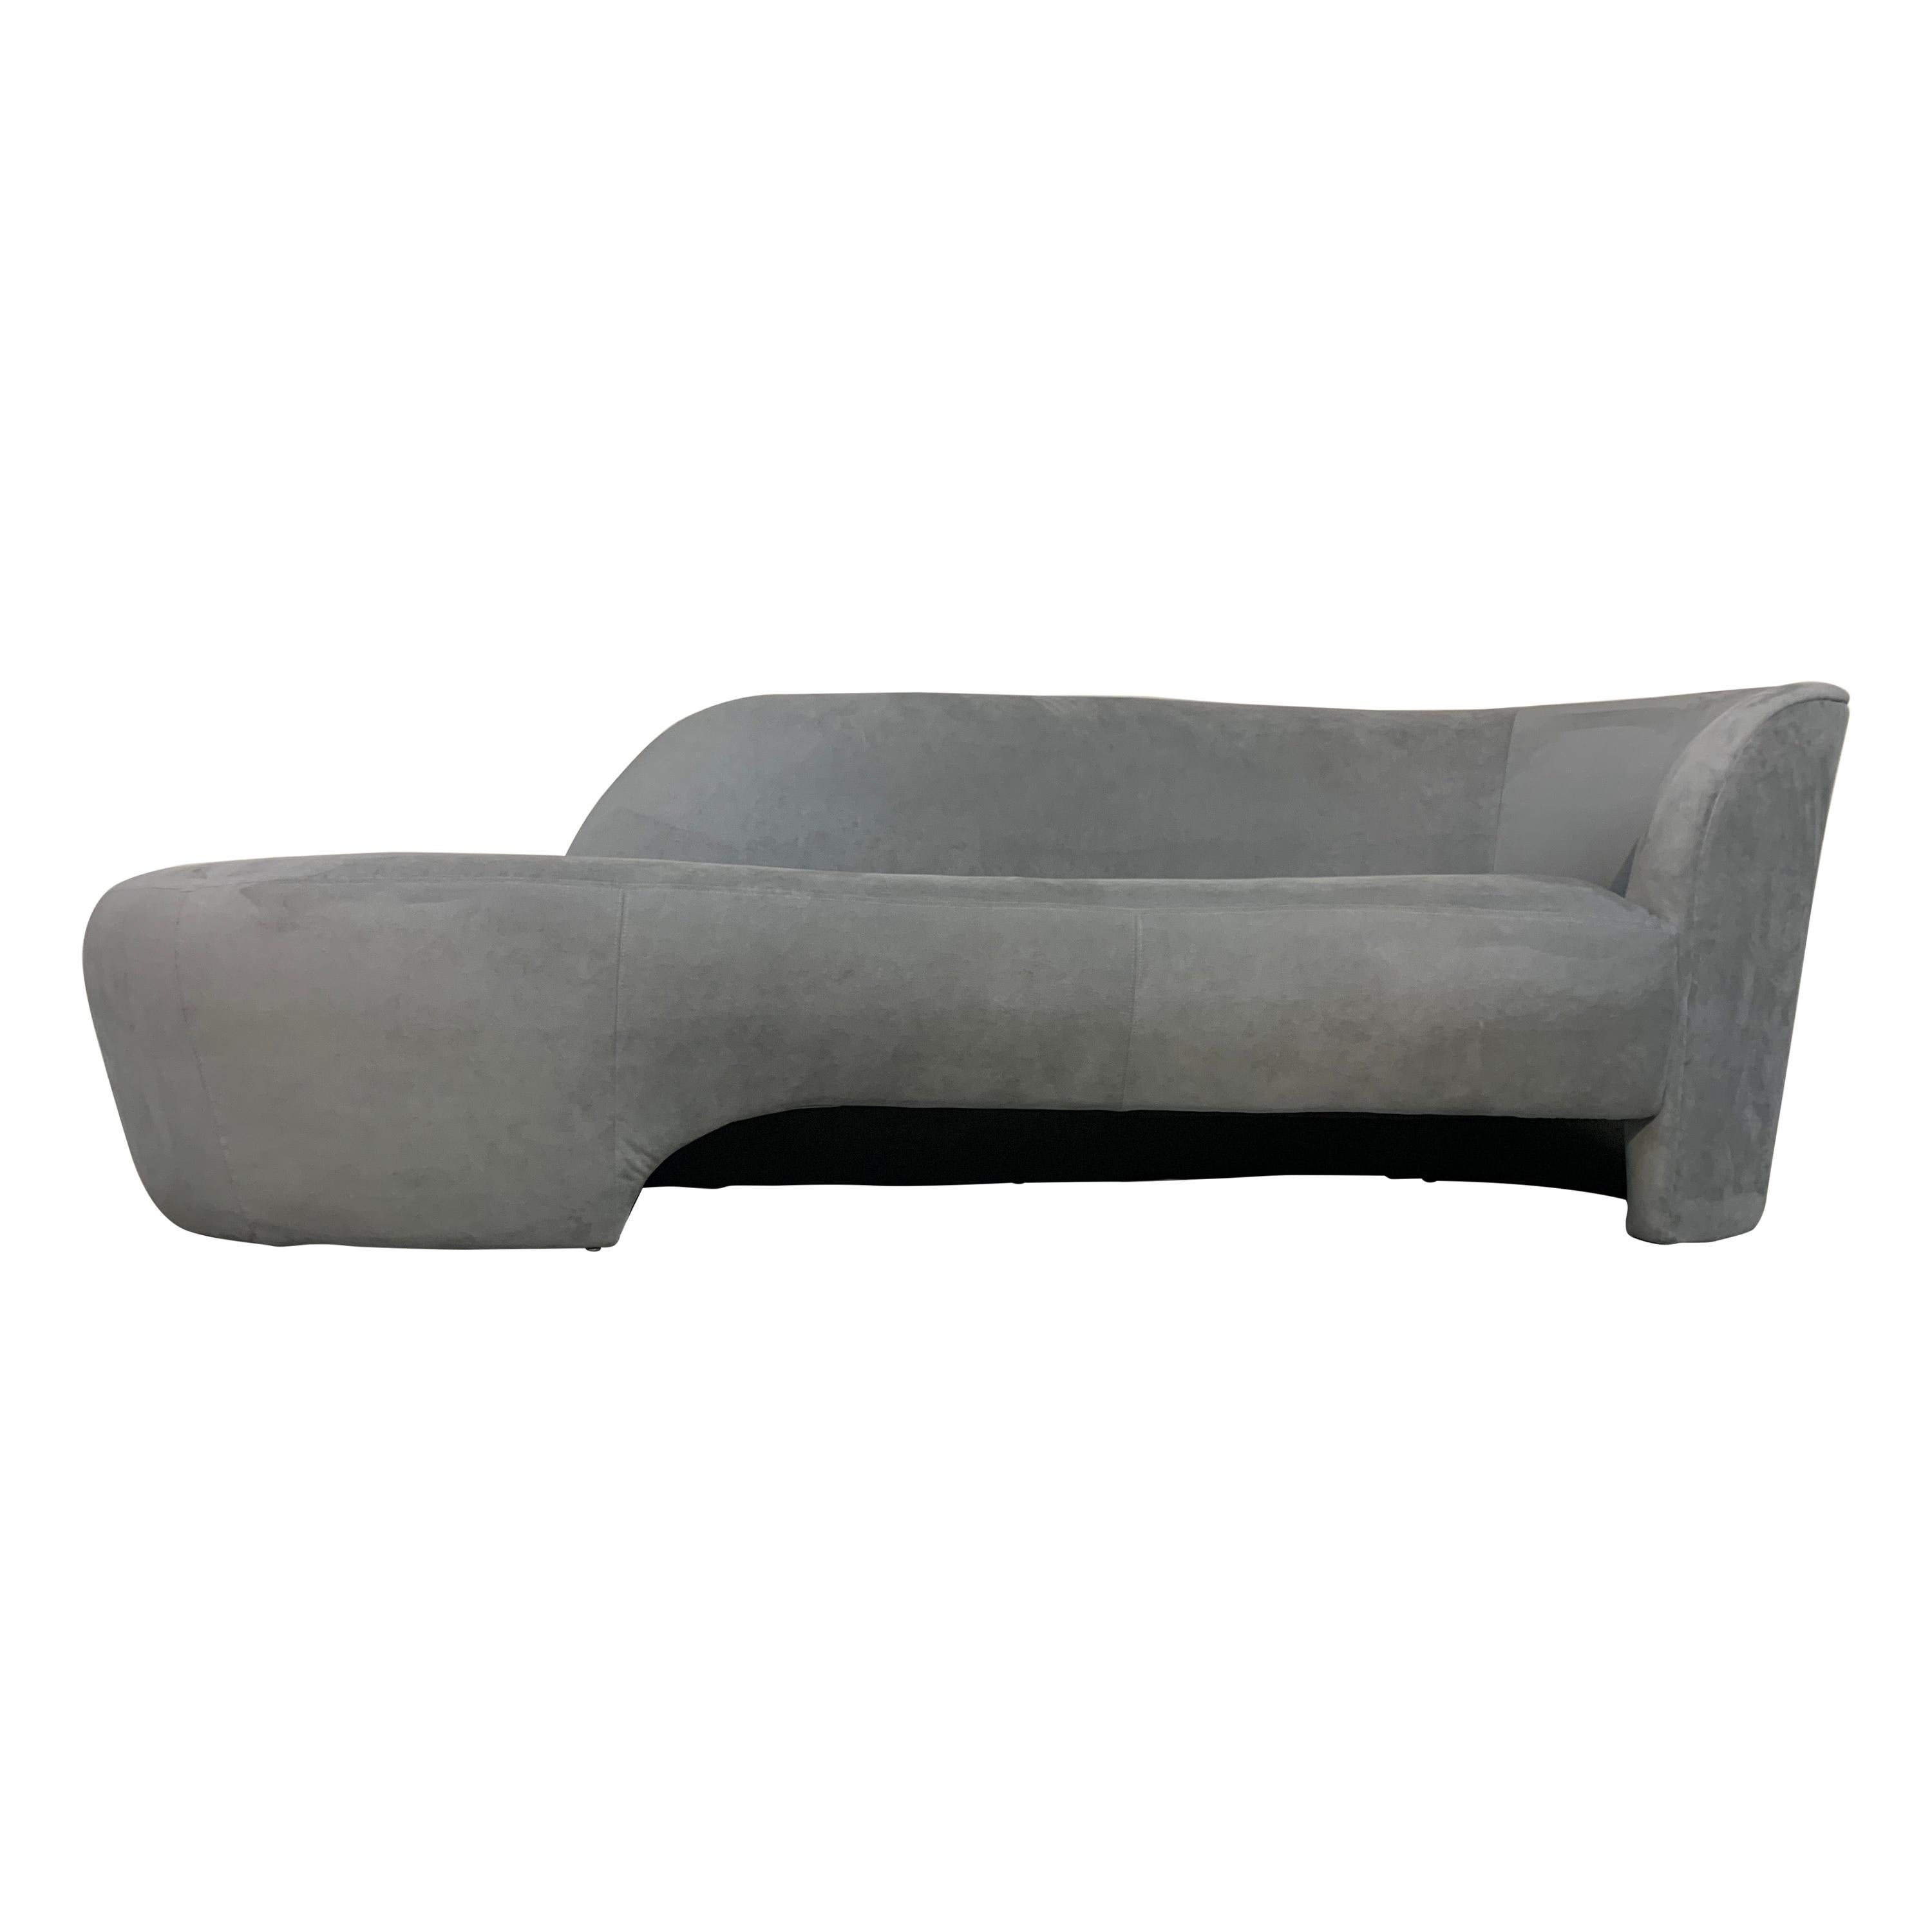 Weiman Preview Sofa Chaise Lounge with Pouf Ottoman in Ultrasuede after Kagan